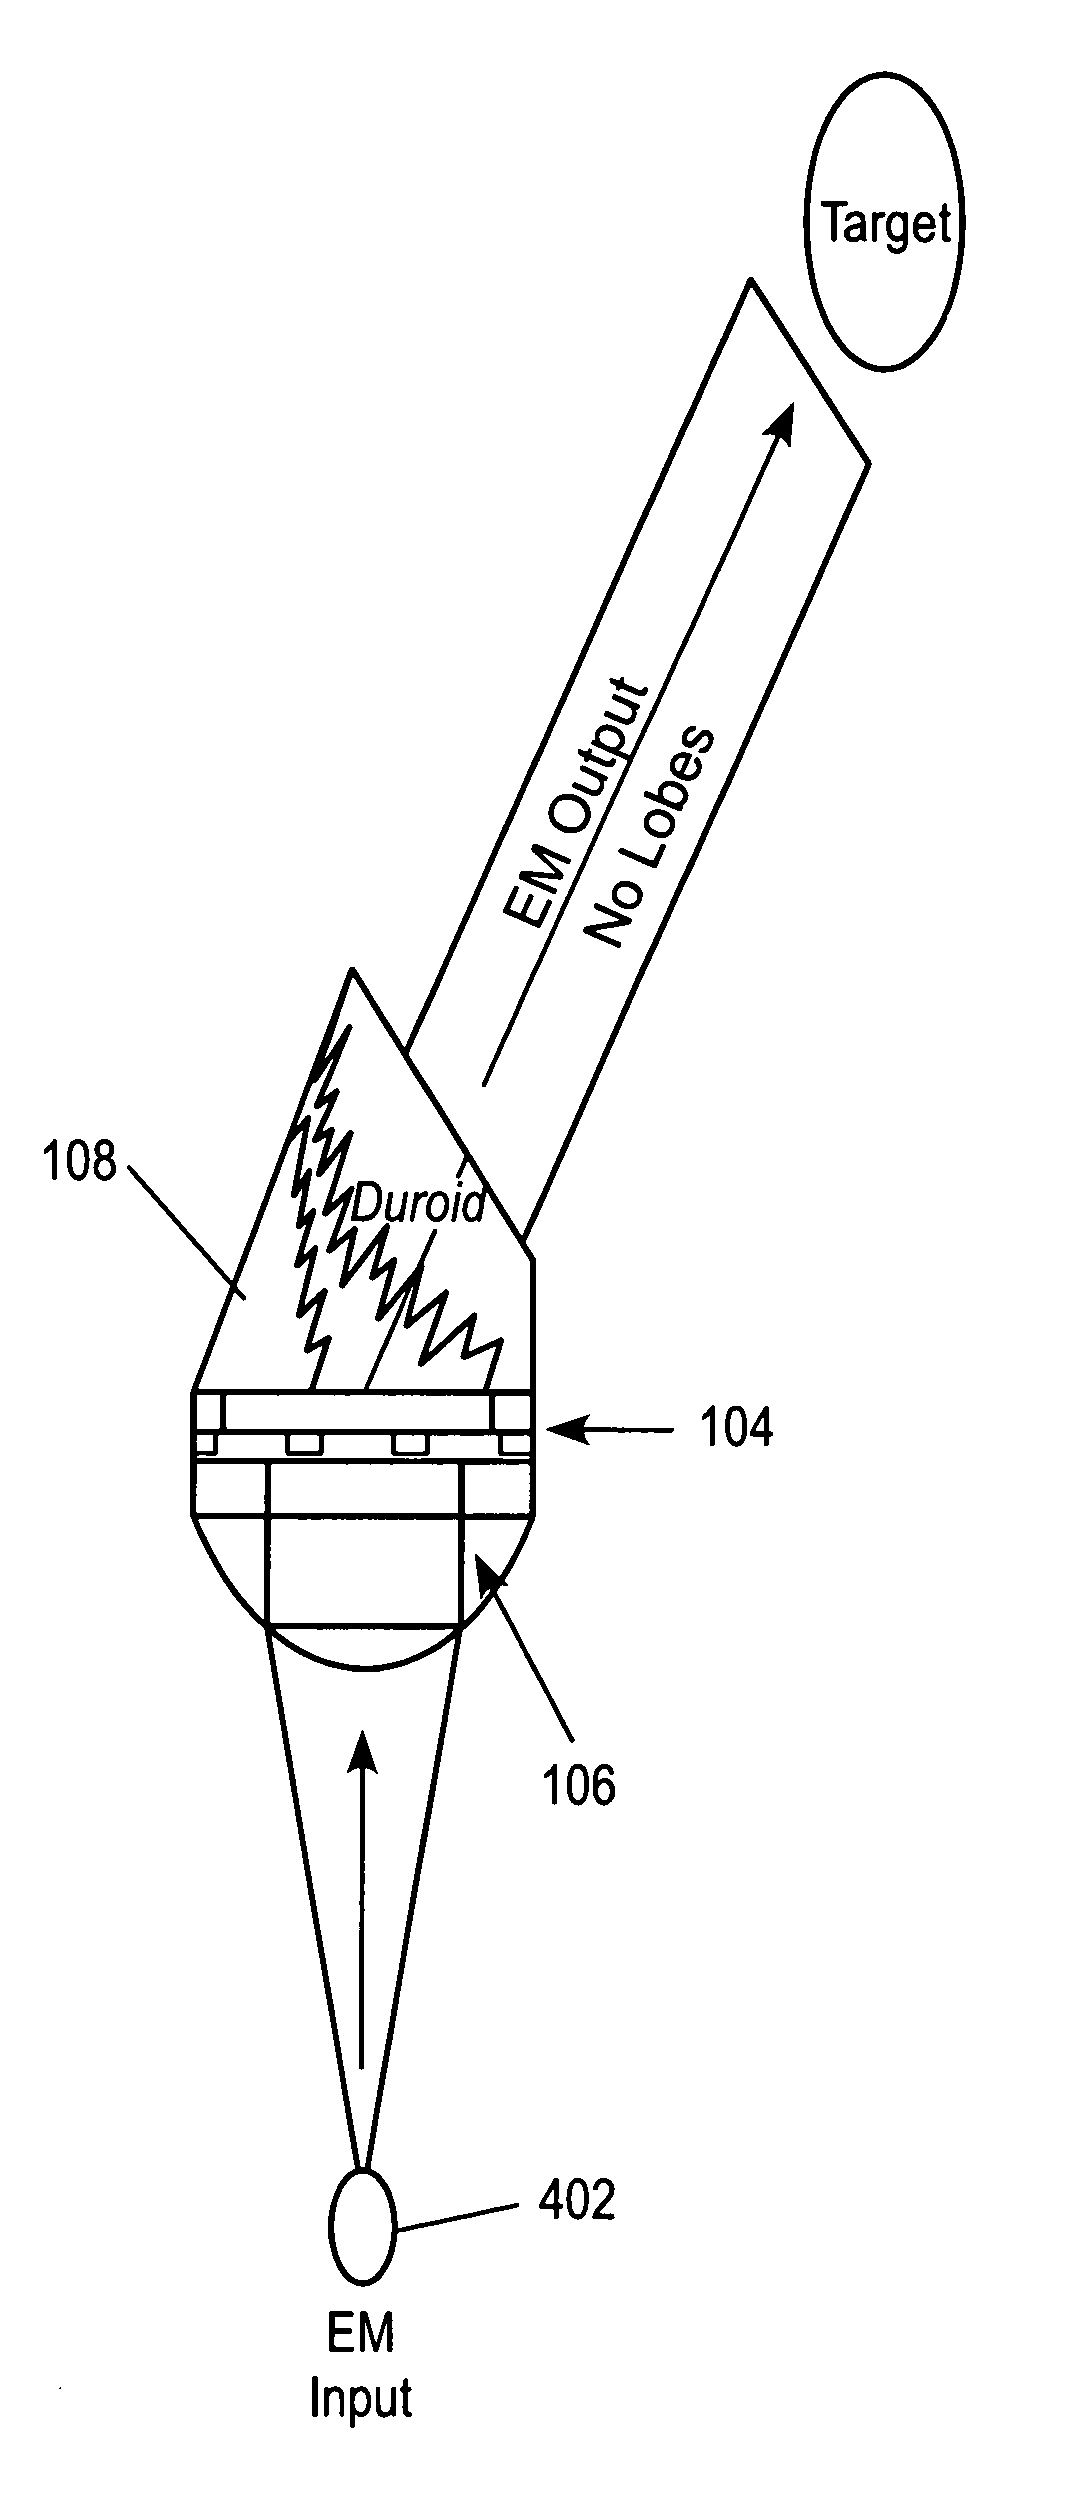 System, method and apparatus for RF directed energy